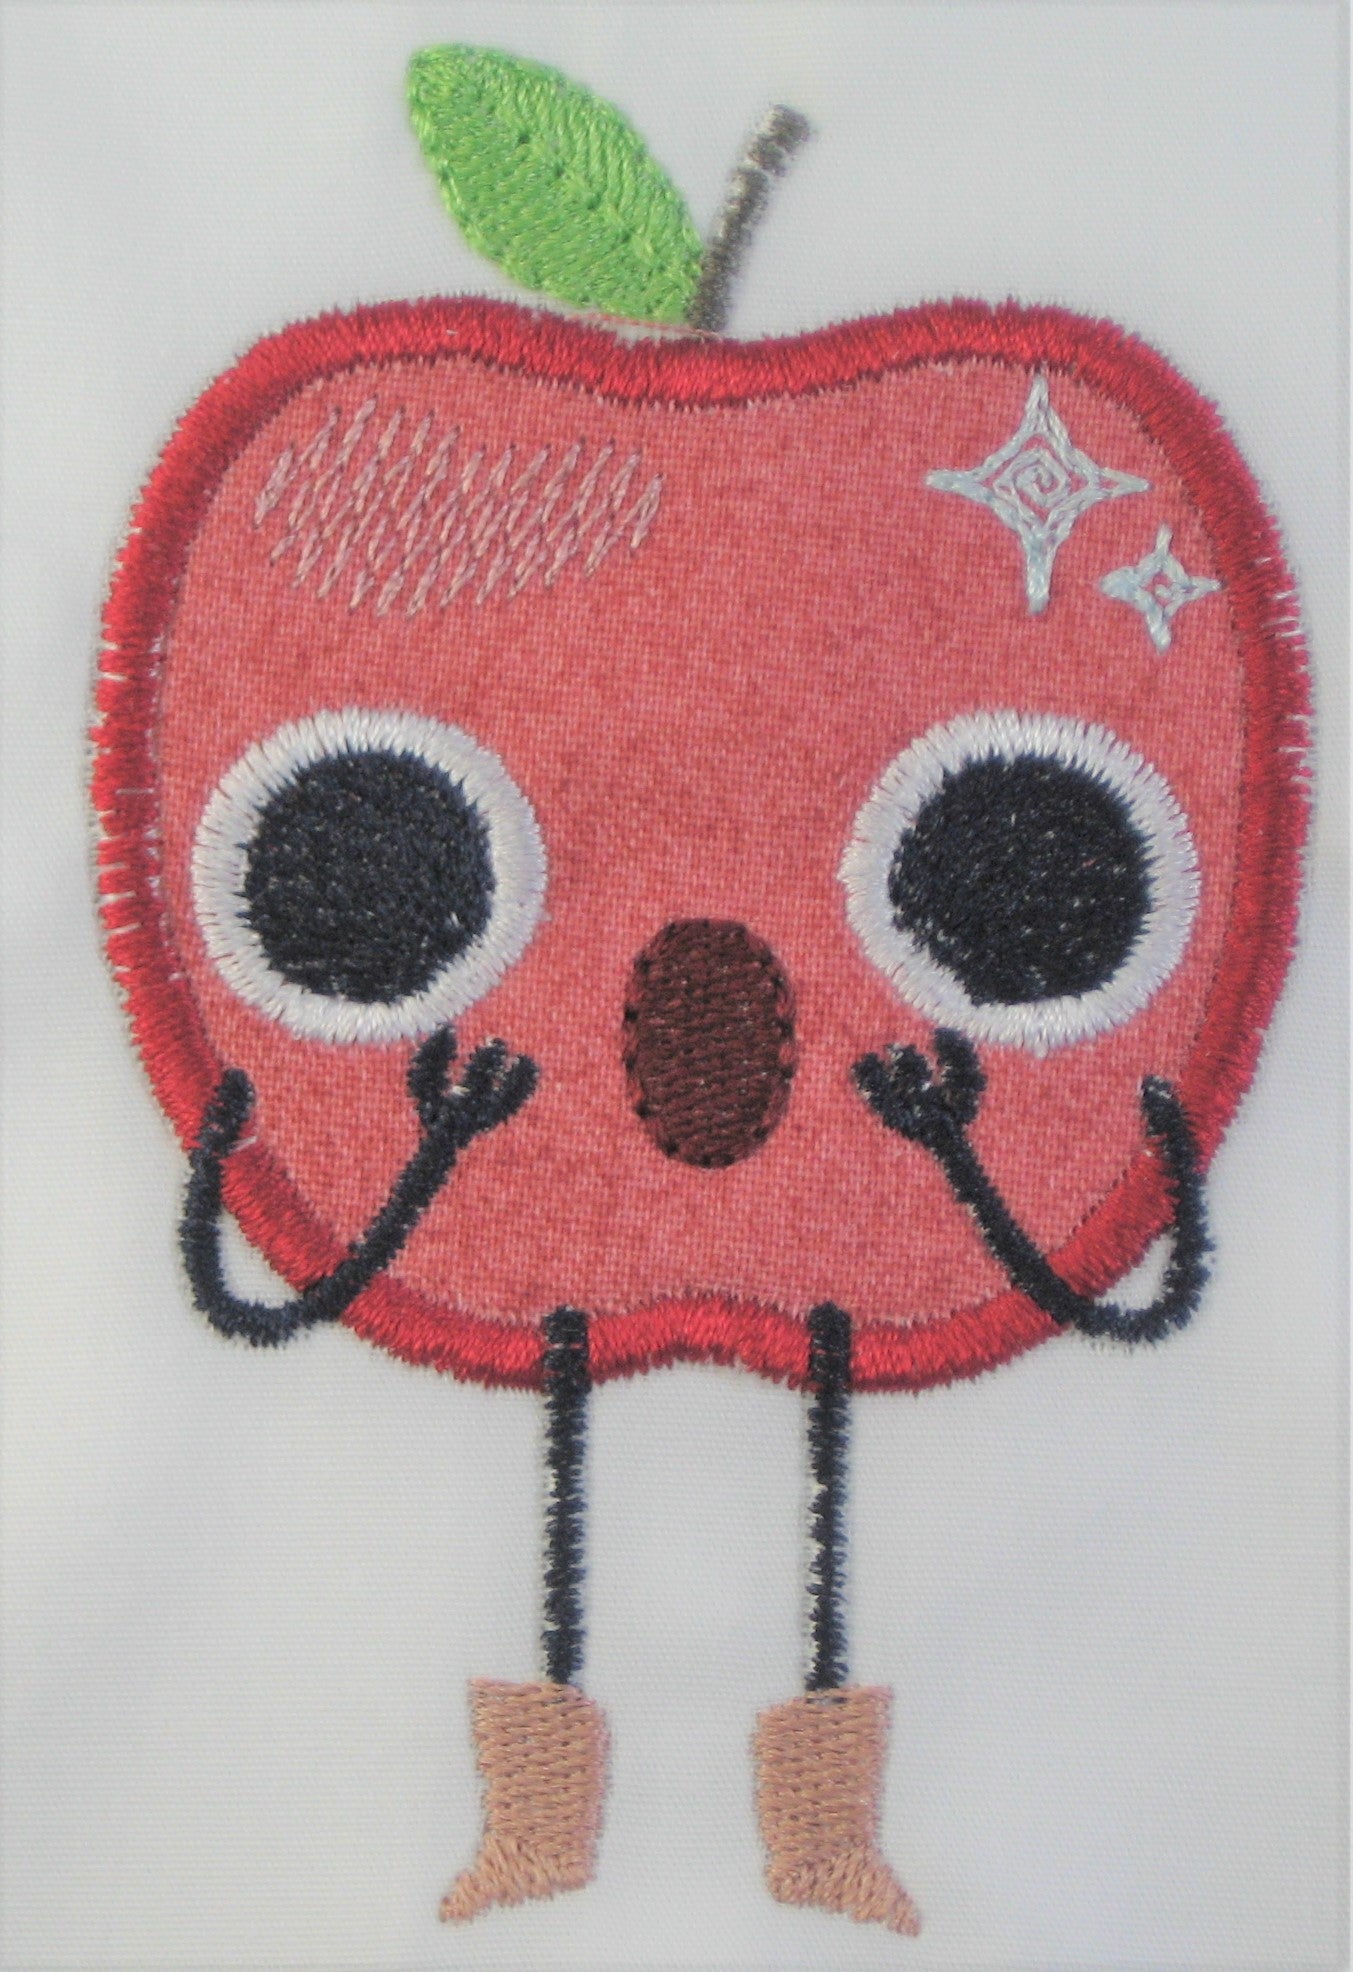 Cute Apple Character Applique-LM [4x4] 11750 Machine Embroidery Designs